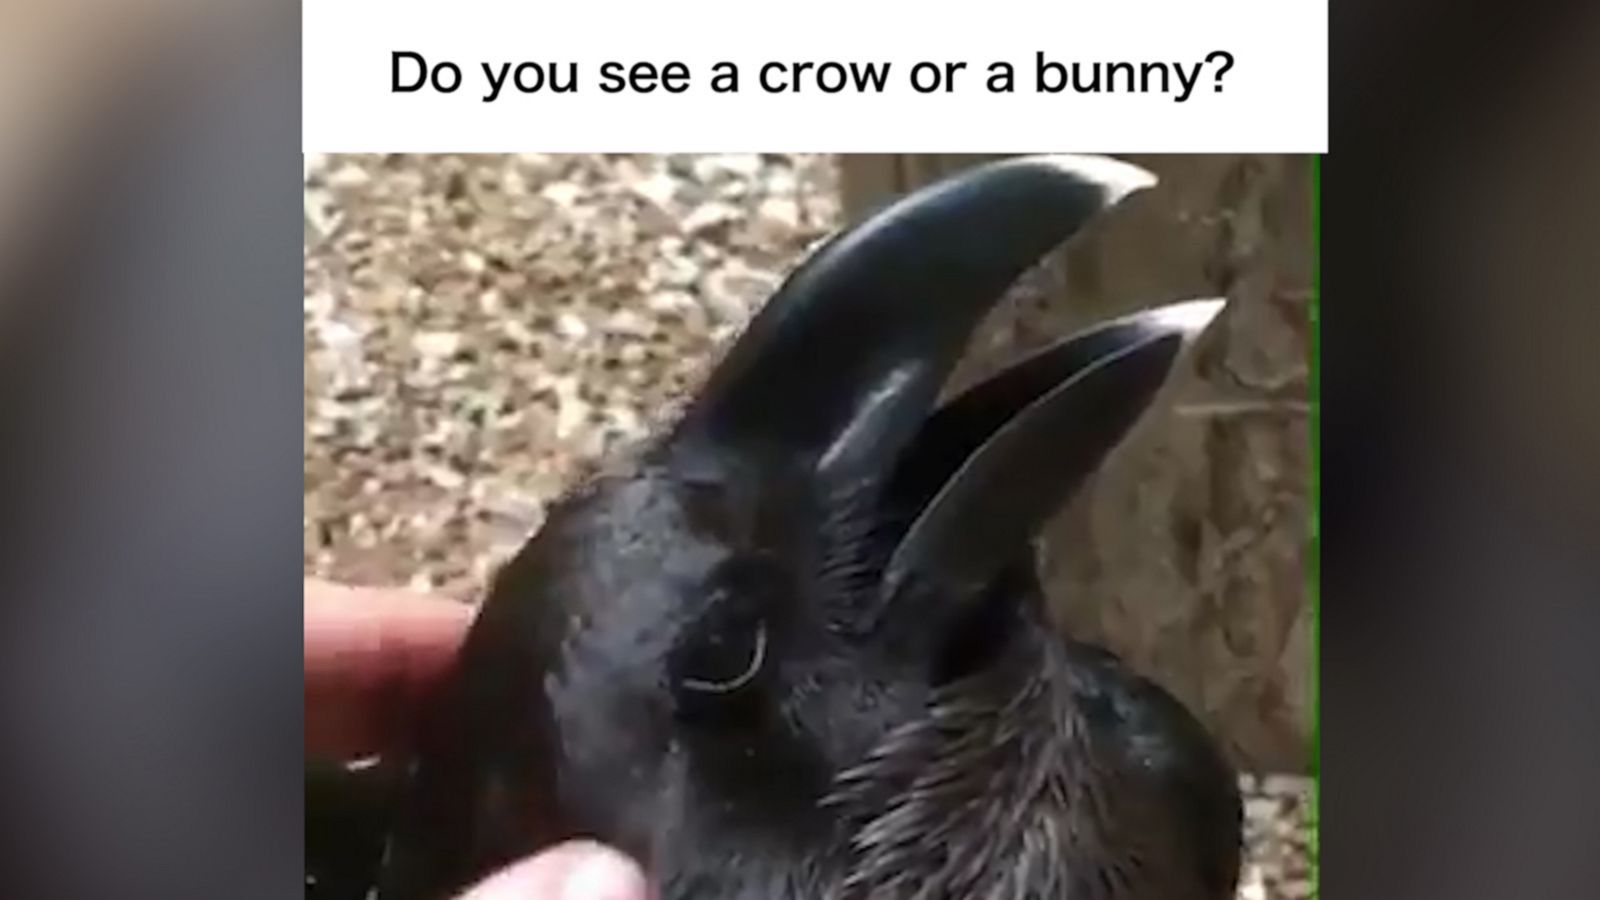 VIDEO: Is this a bunny or a raven?